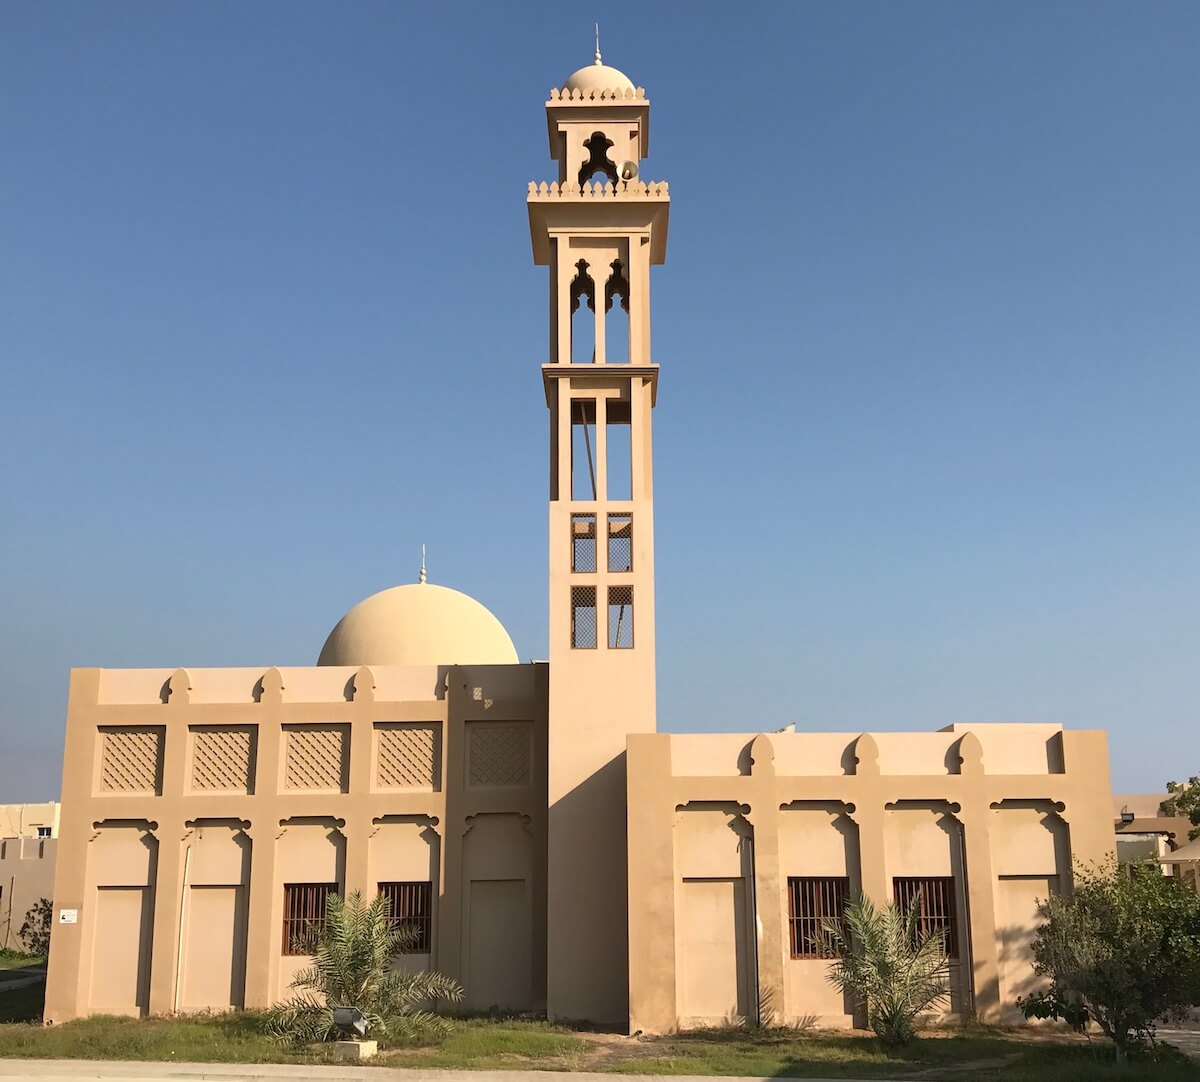 Mosque built in traditional Emirati architectural style